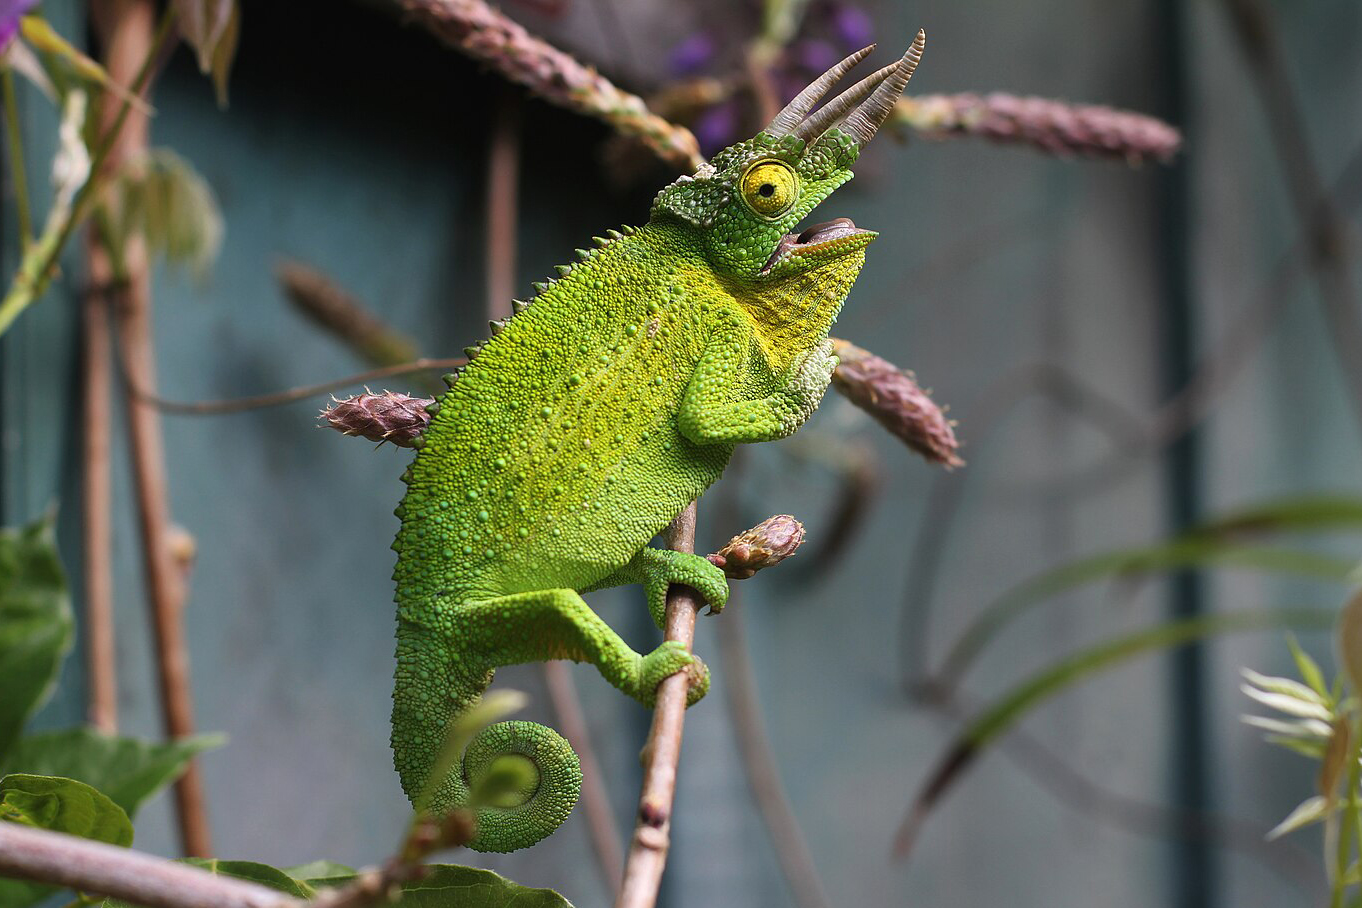 Development of sexual characteristics in African chameleons